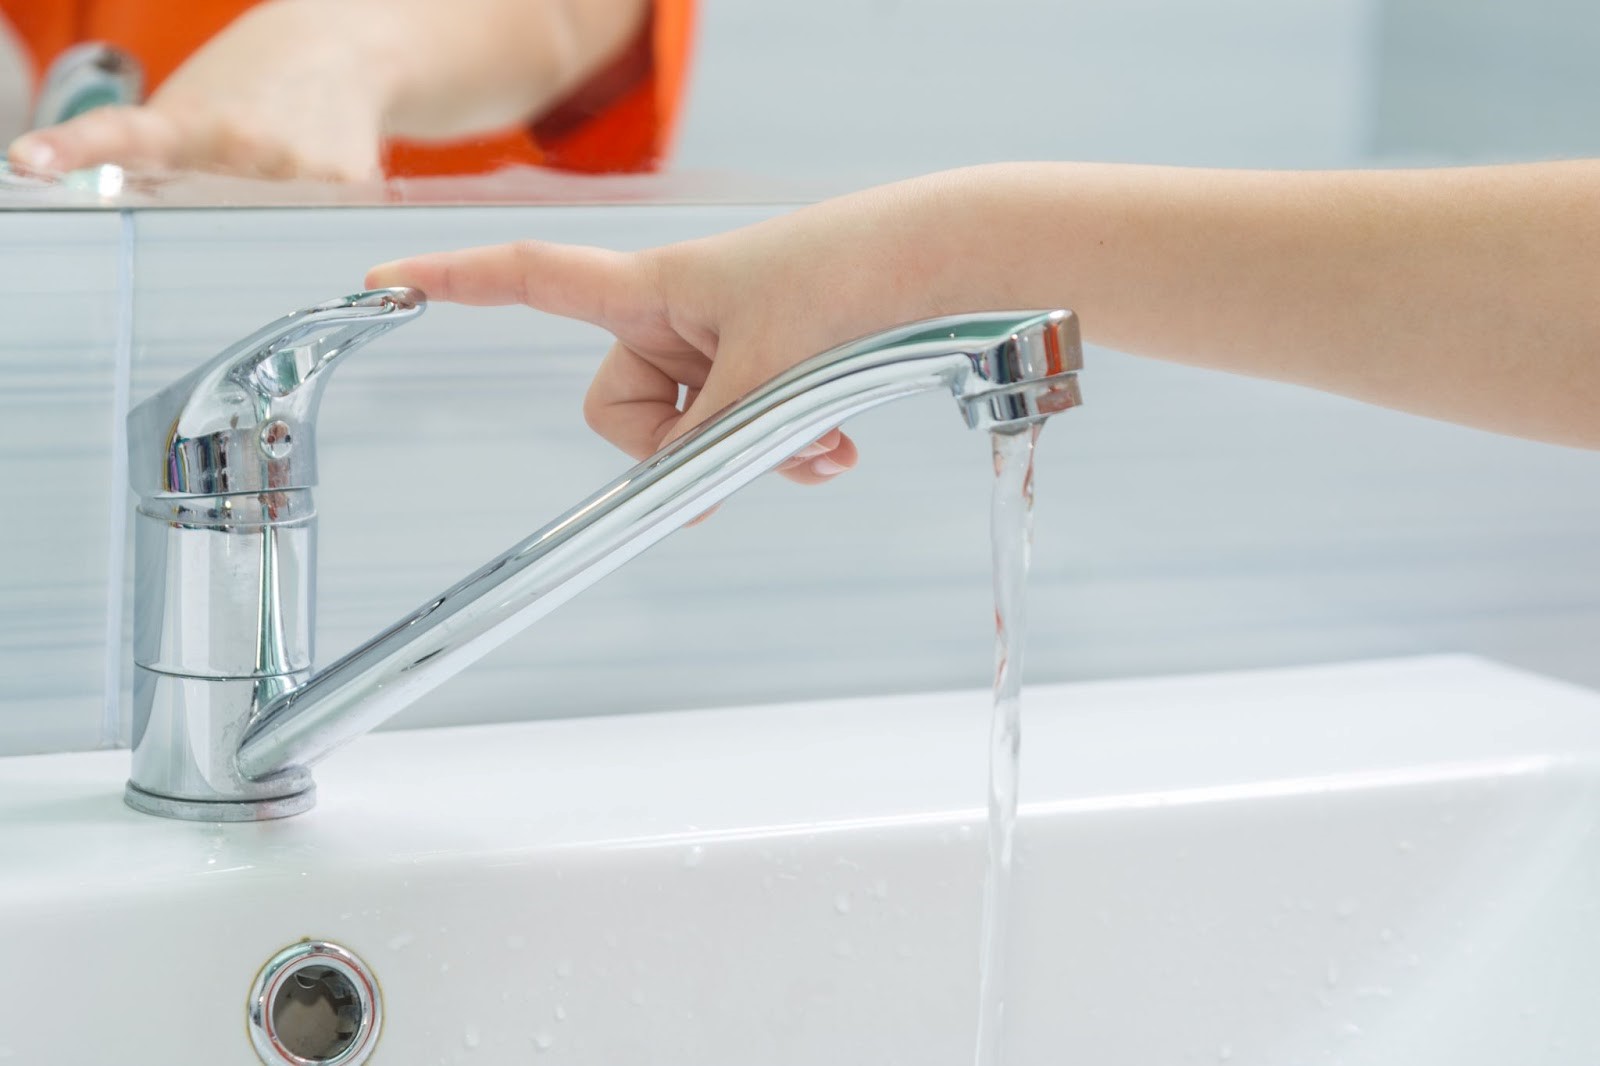 How To Fix A Leaking Mixer Tap